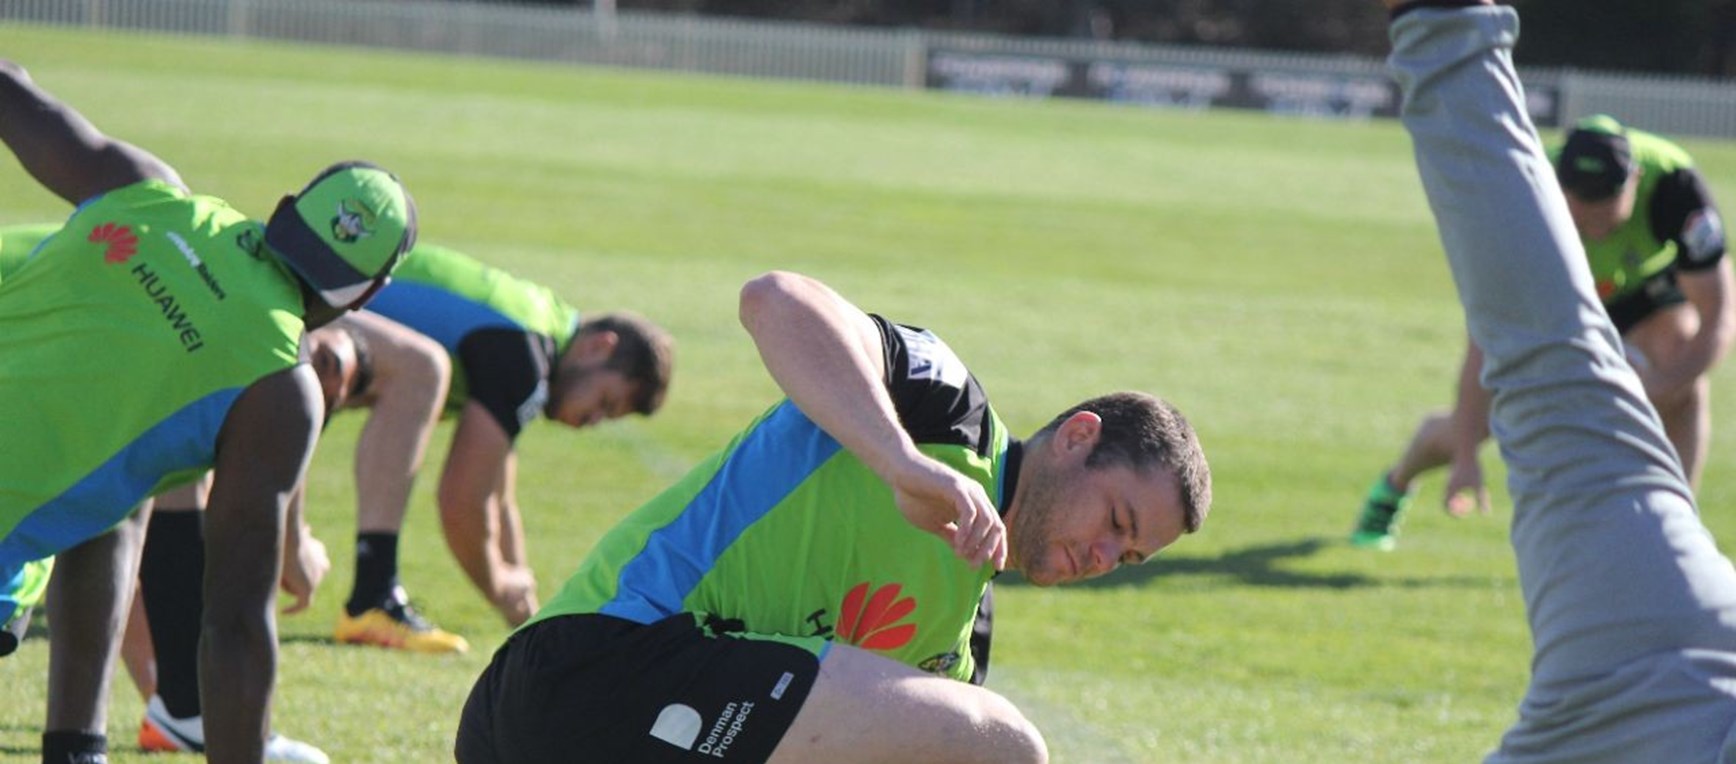 Gallery: Raiders stretch out before jetting off